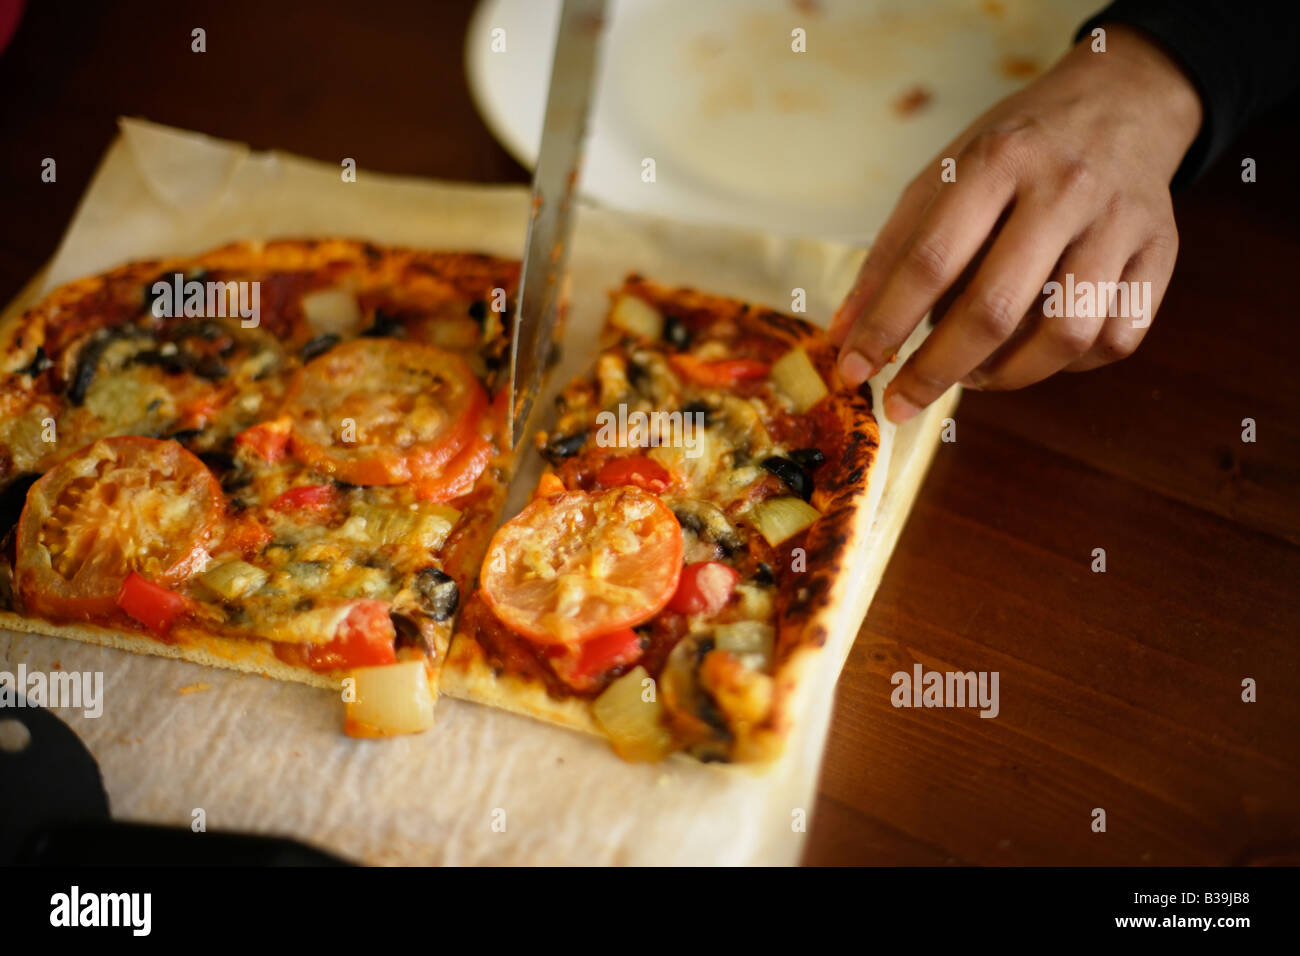 Homemade Pizza Indian woman cuts a slice Stock Photo